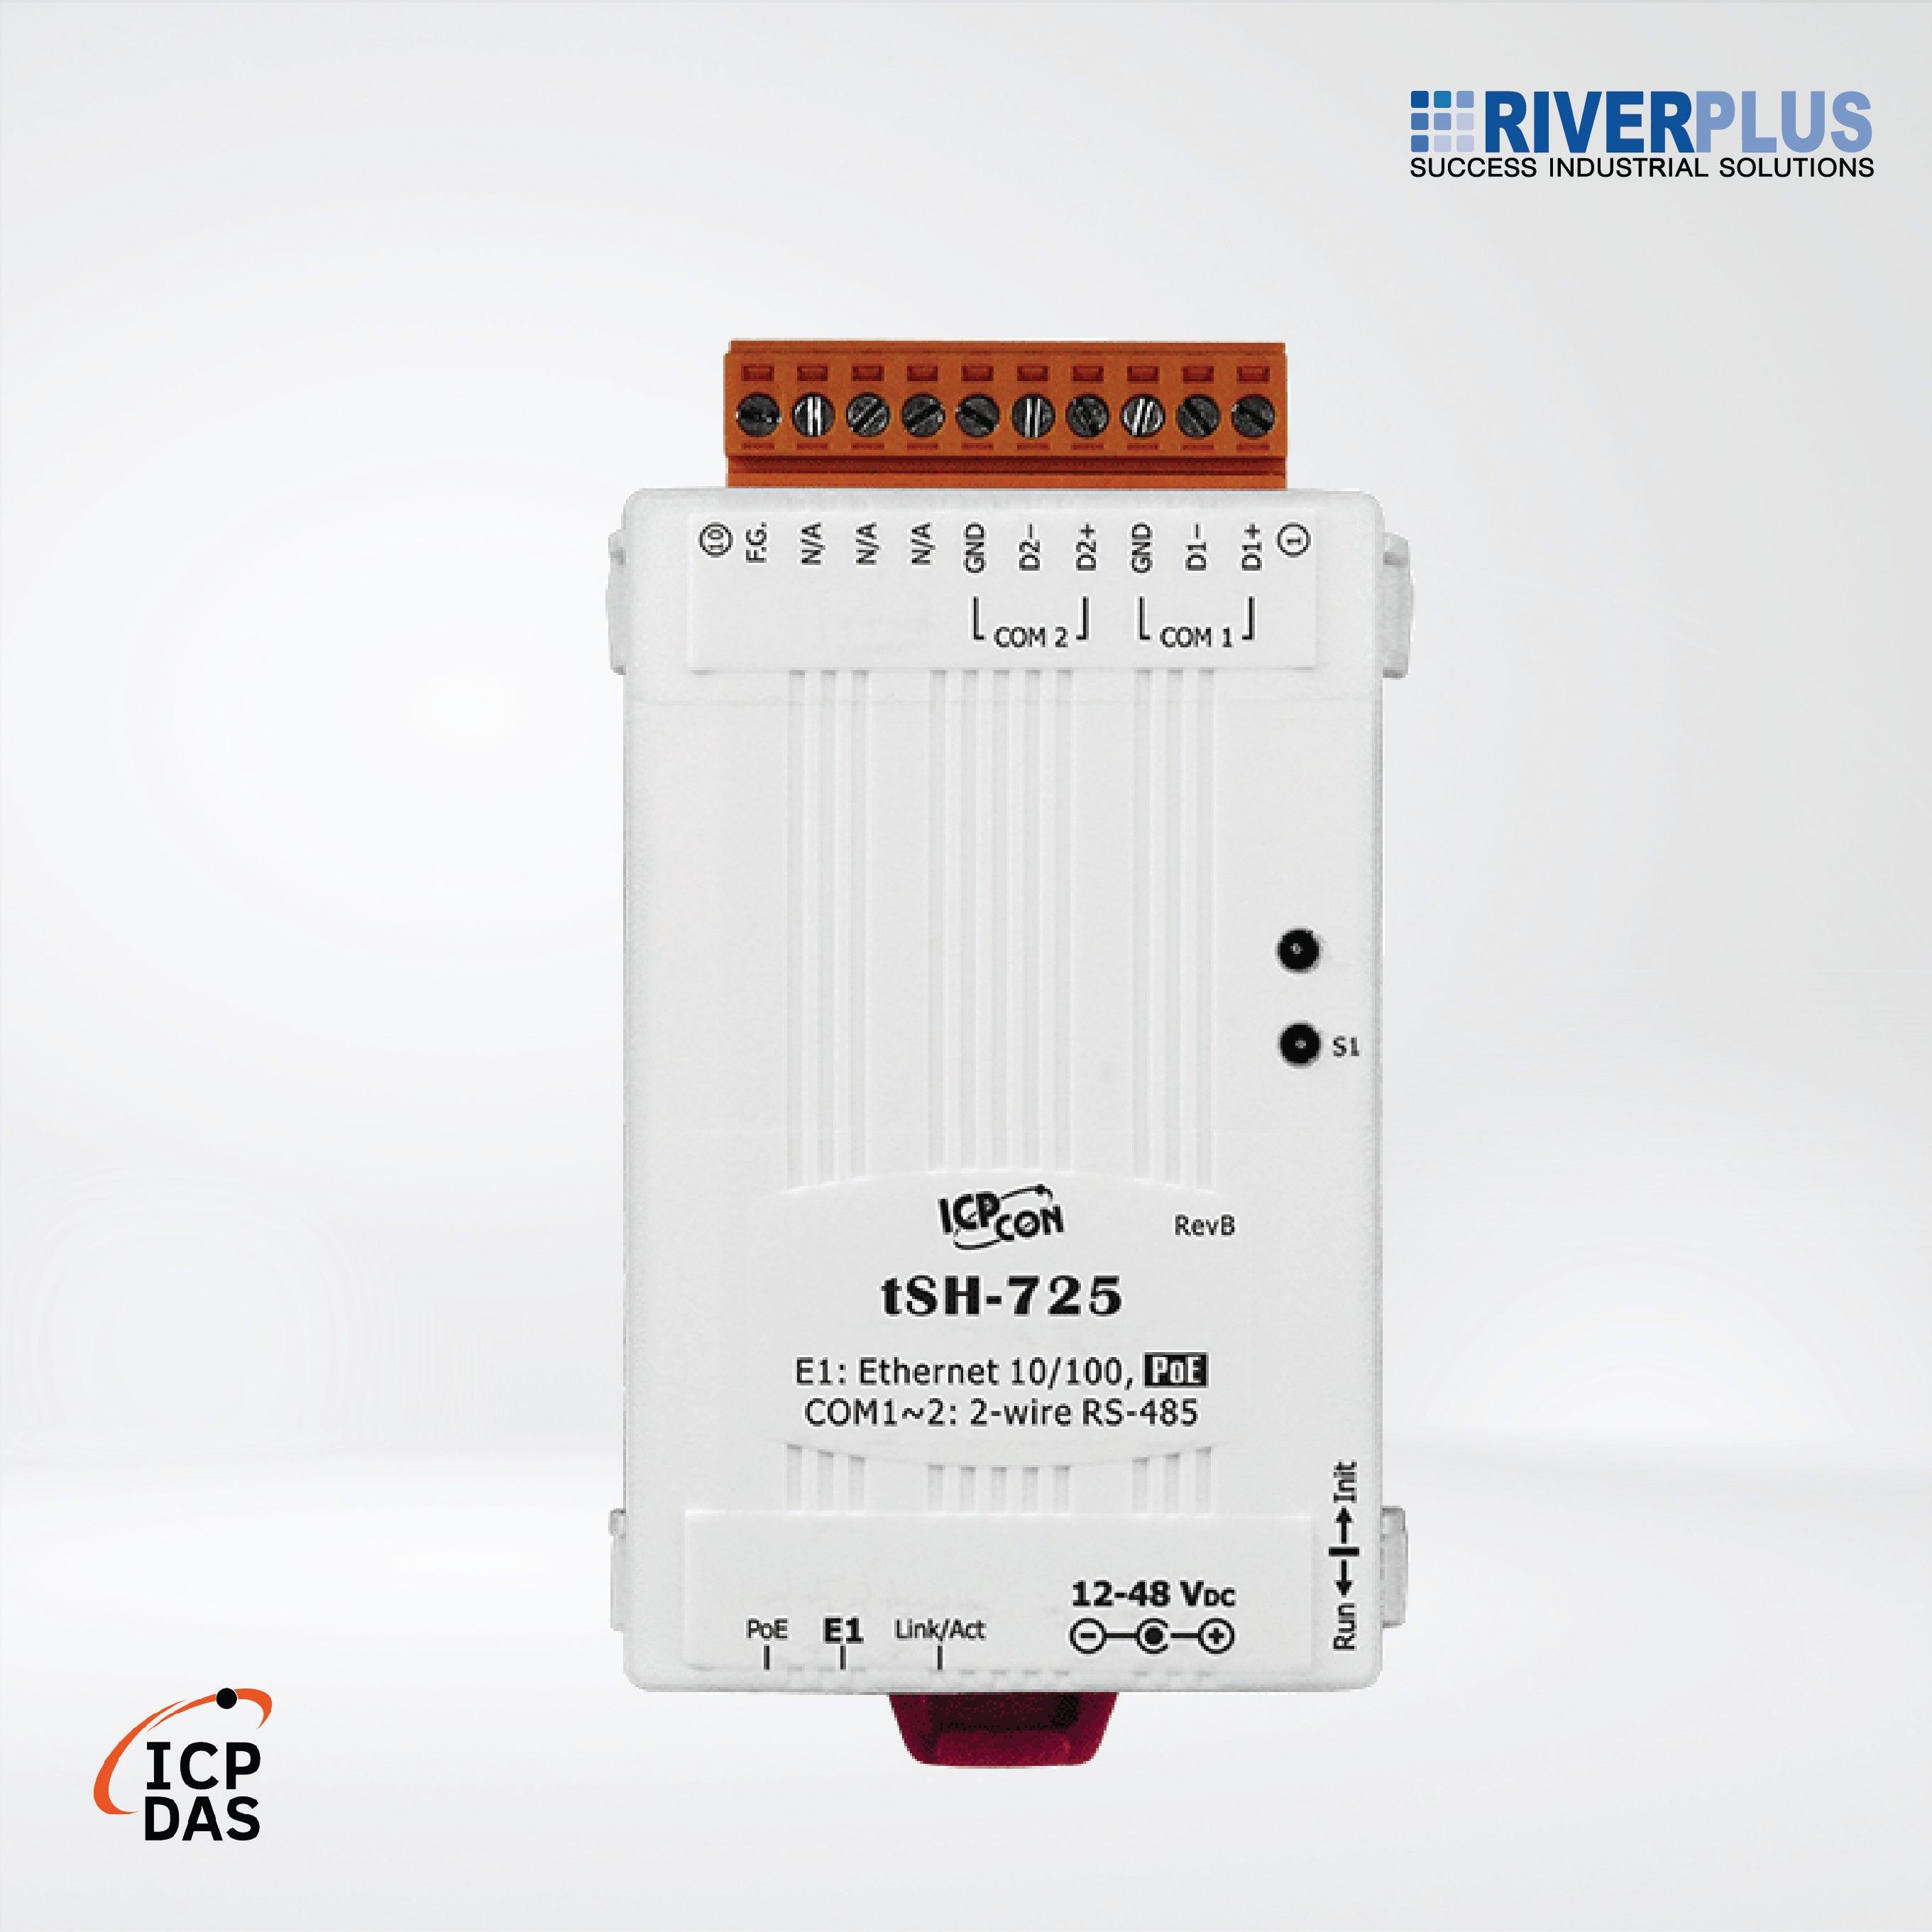 tSH-725 Tiny (2x RS-485) Serial Port Converter with PoE - Riverplus